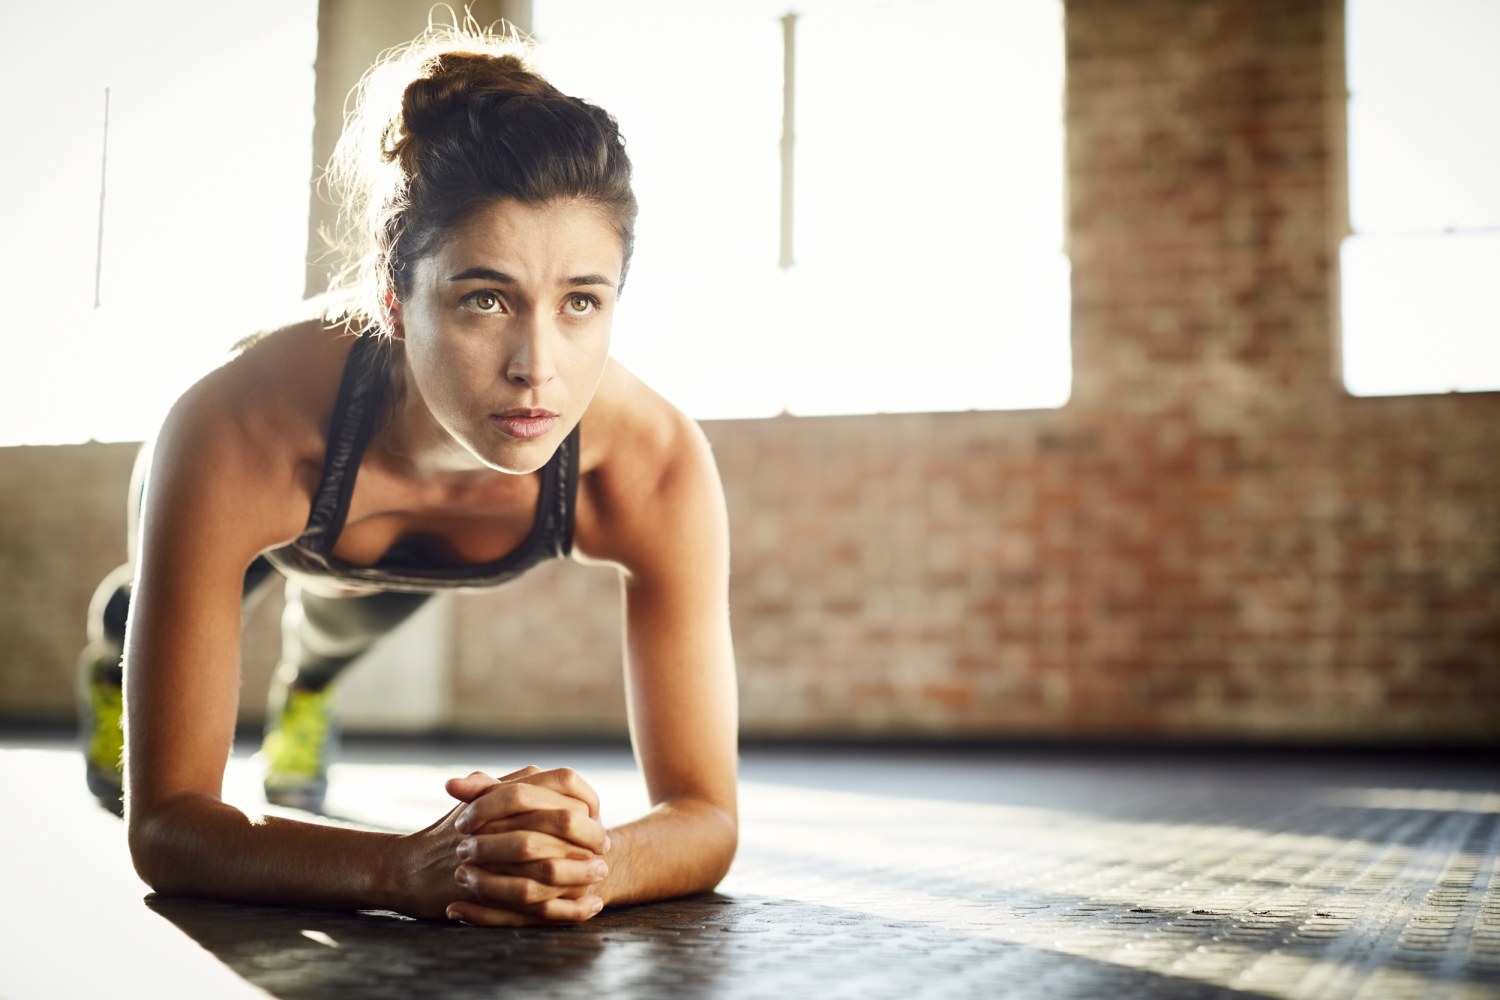 How to Begin a New Fitness Plan When You're Extremely Out of Shape